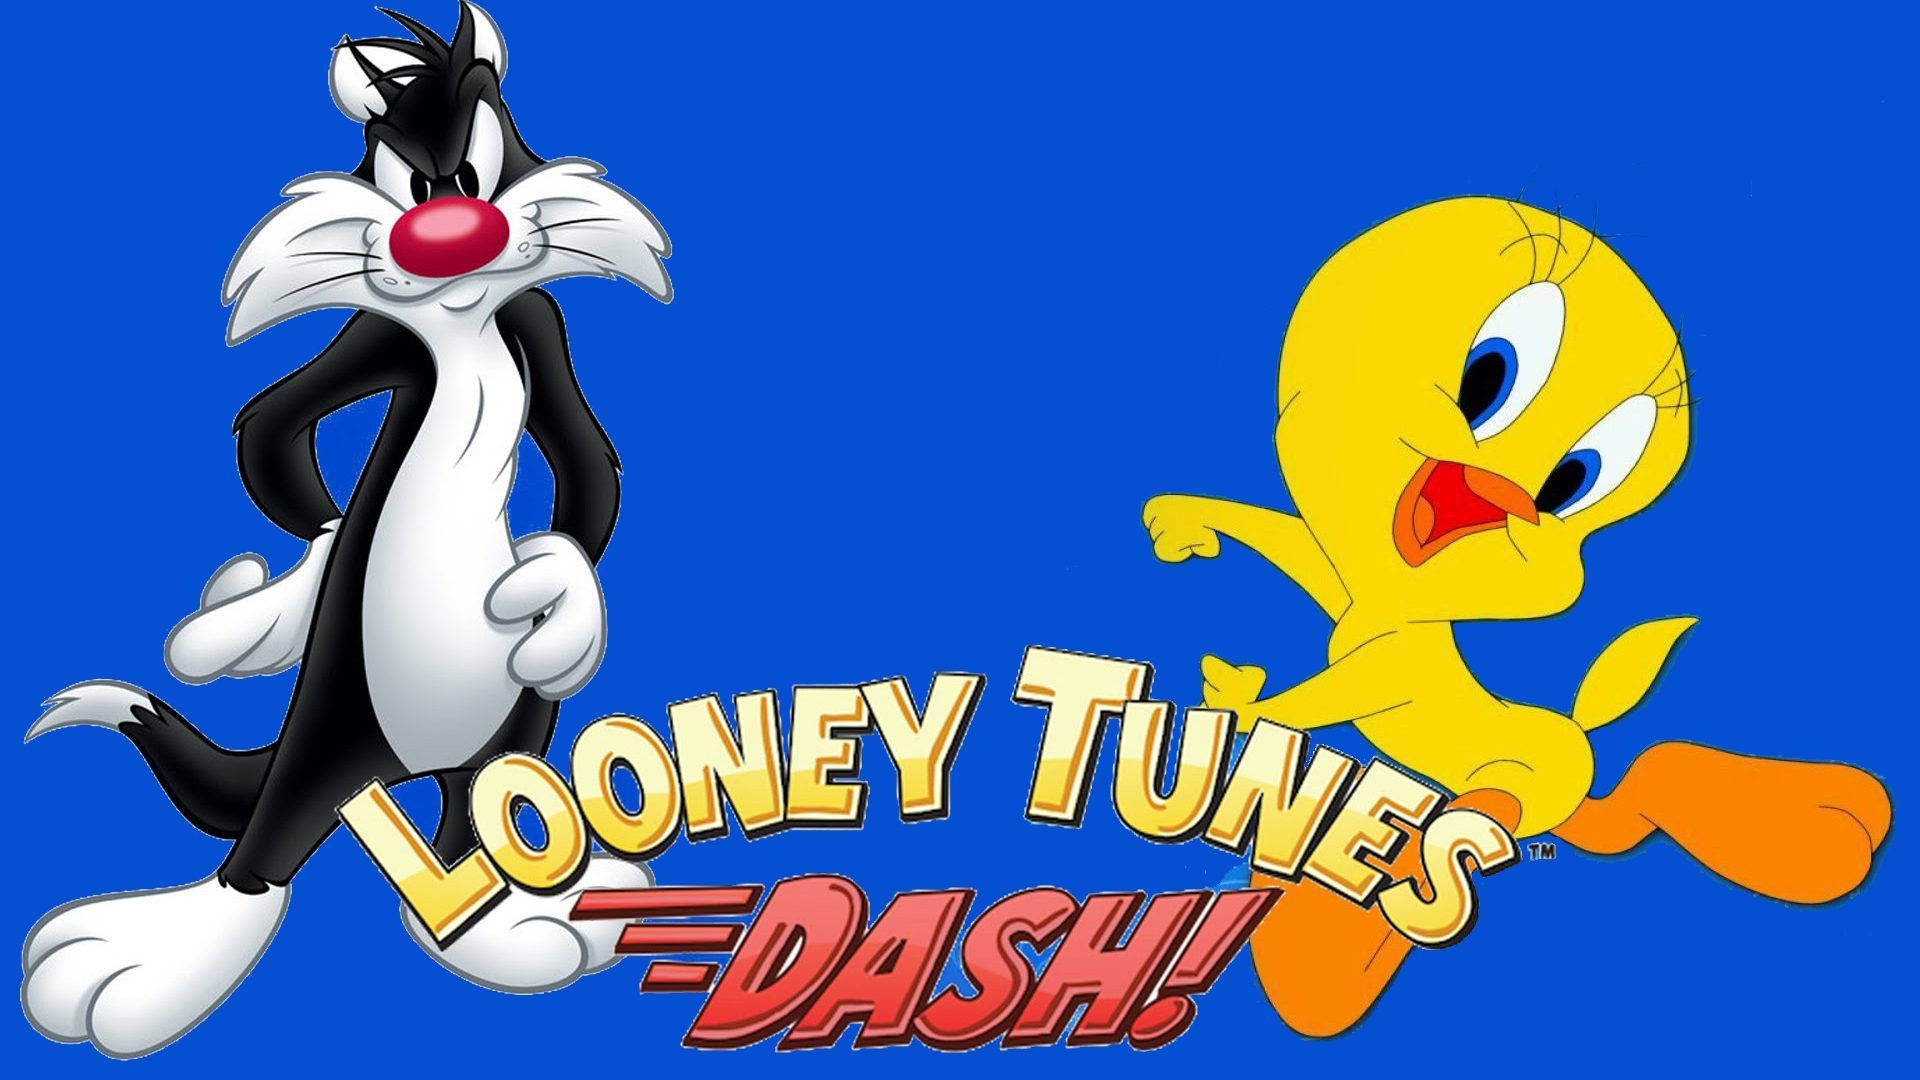 Sylvester And Looney Tunes Dash